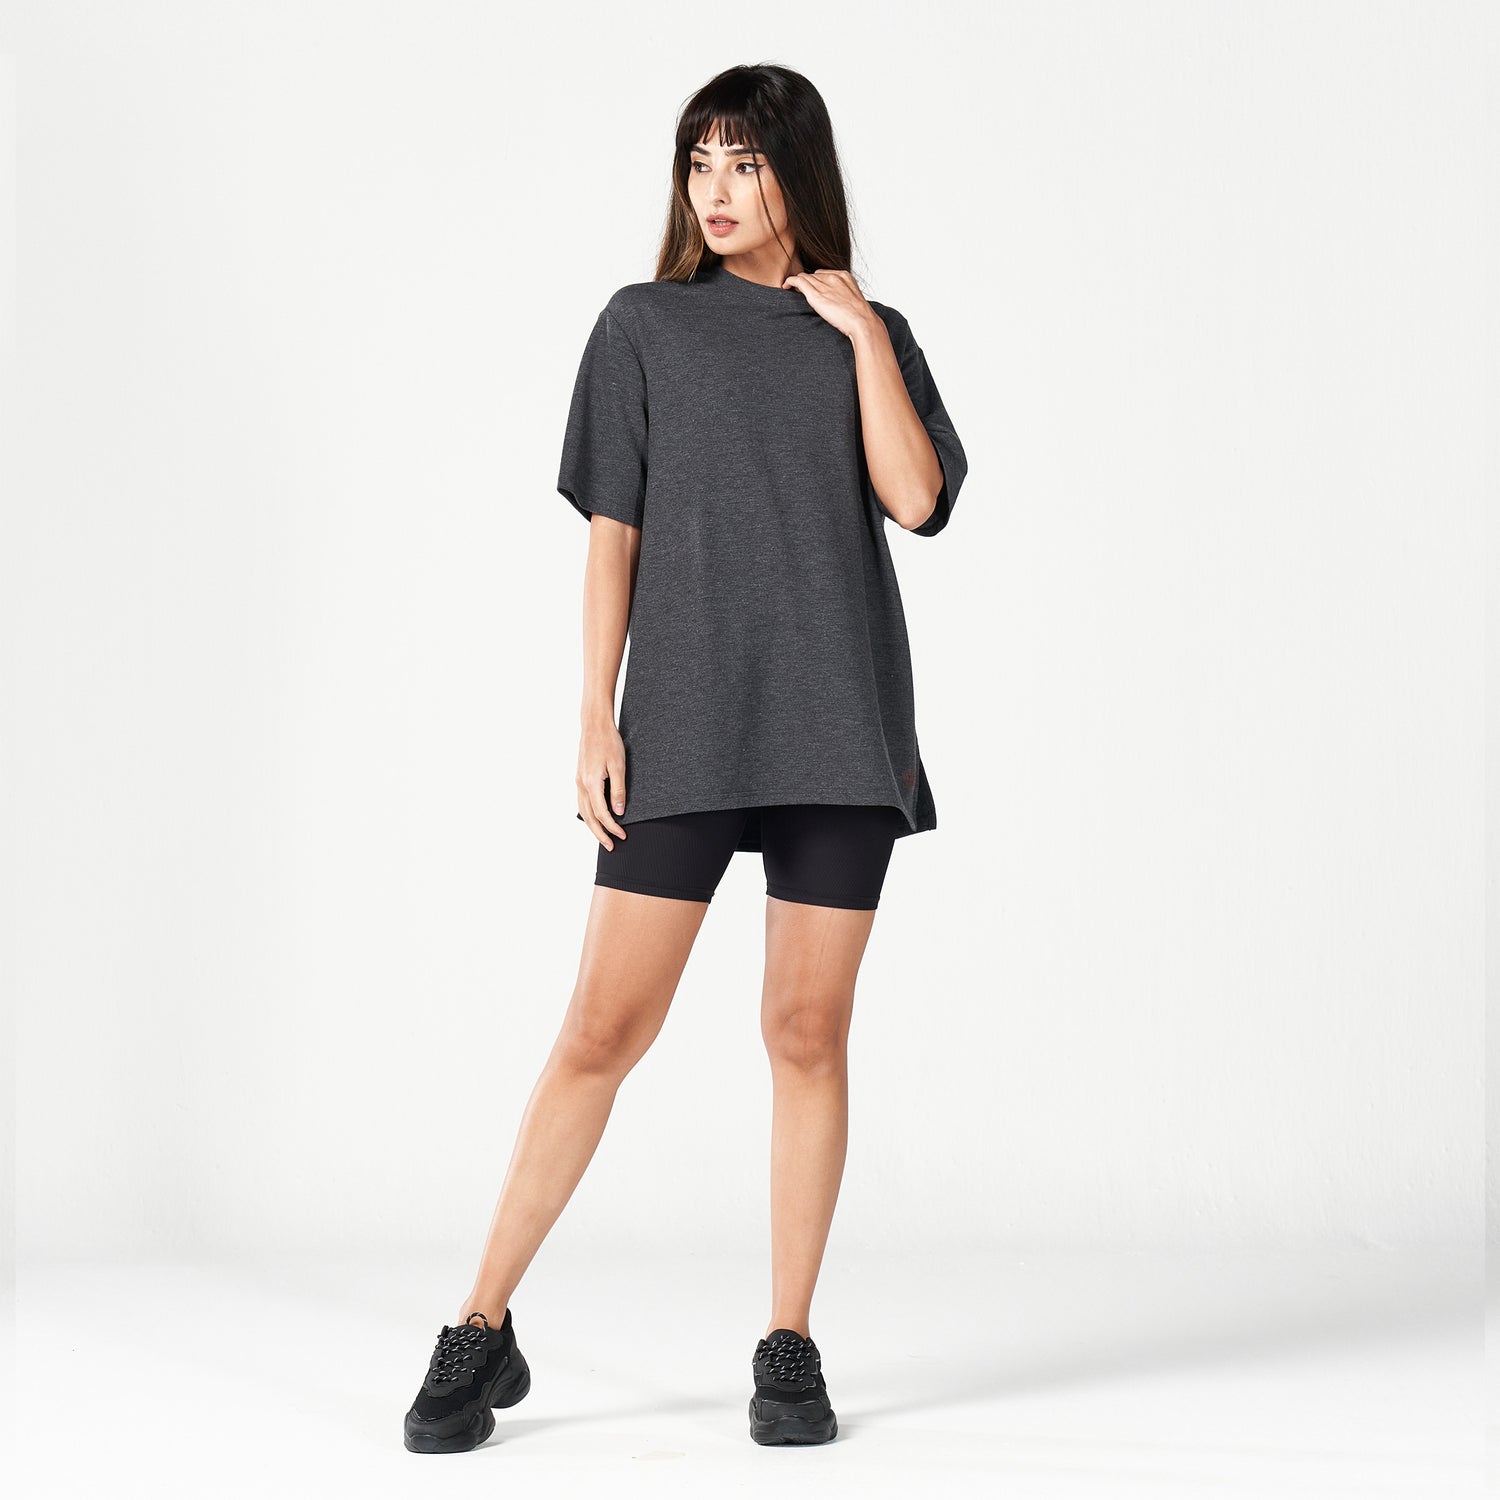 squatwolf-workout-clothes-code-oversized-live-in-tee-black-marl-gym-t-shirts-for-women